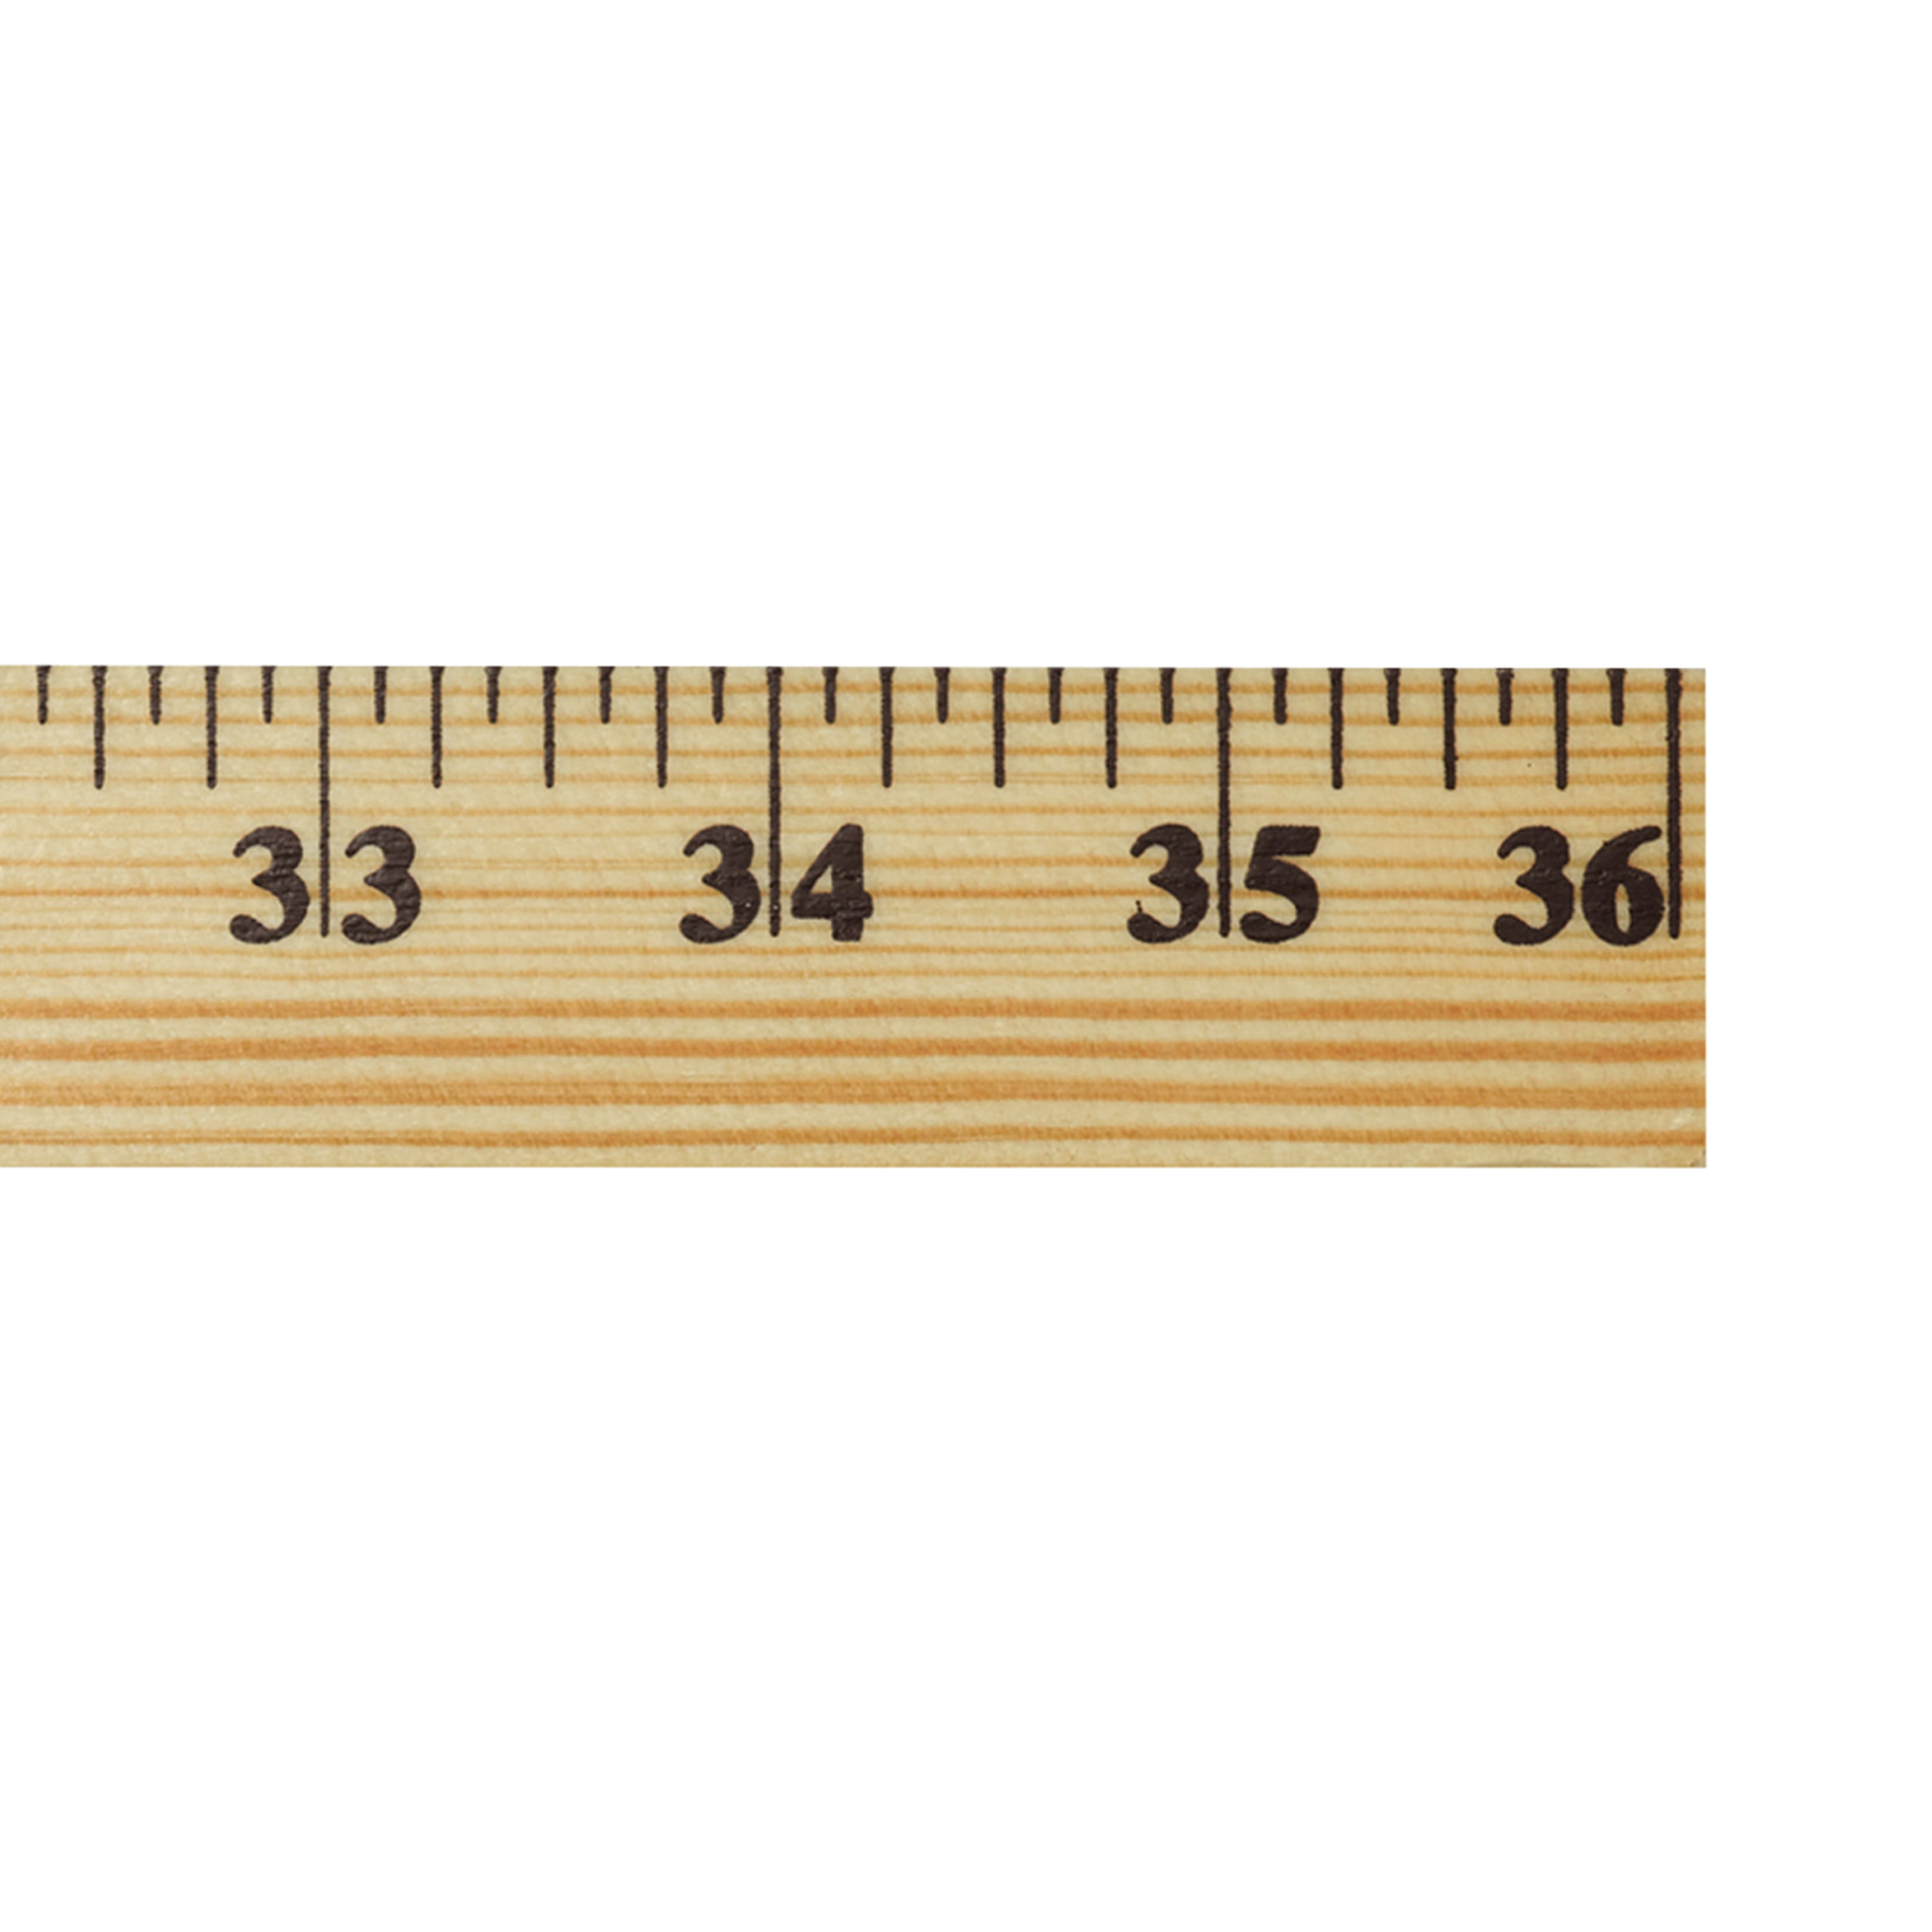 36 Inch Ruler, Yard Stick, Measuring Cut File Graphic by